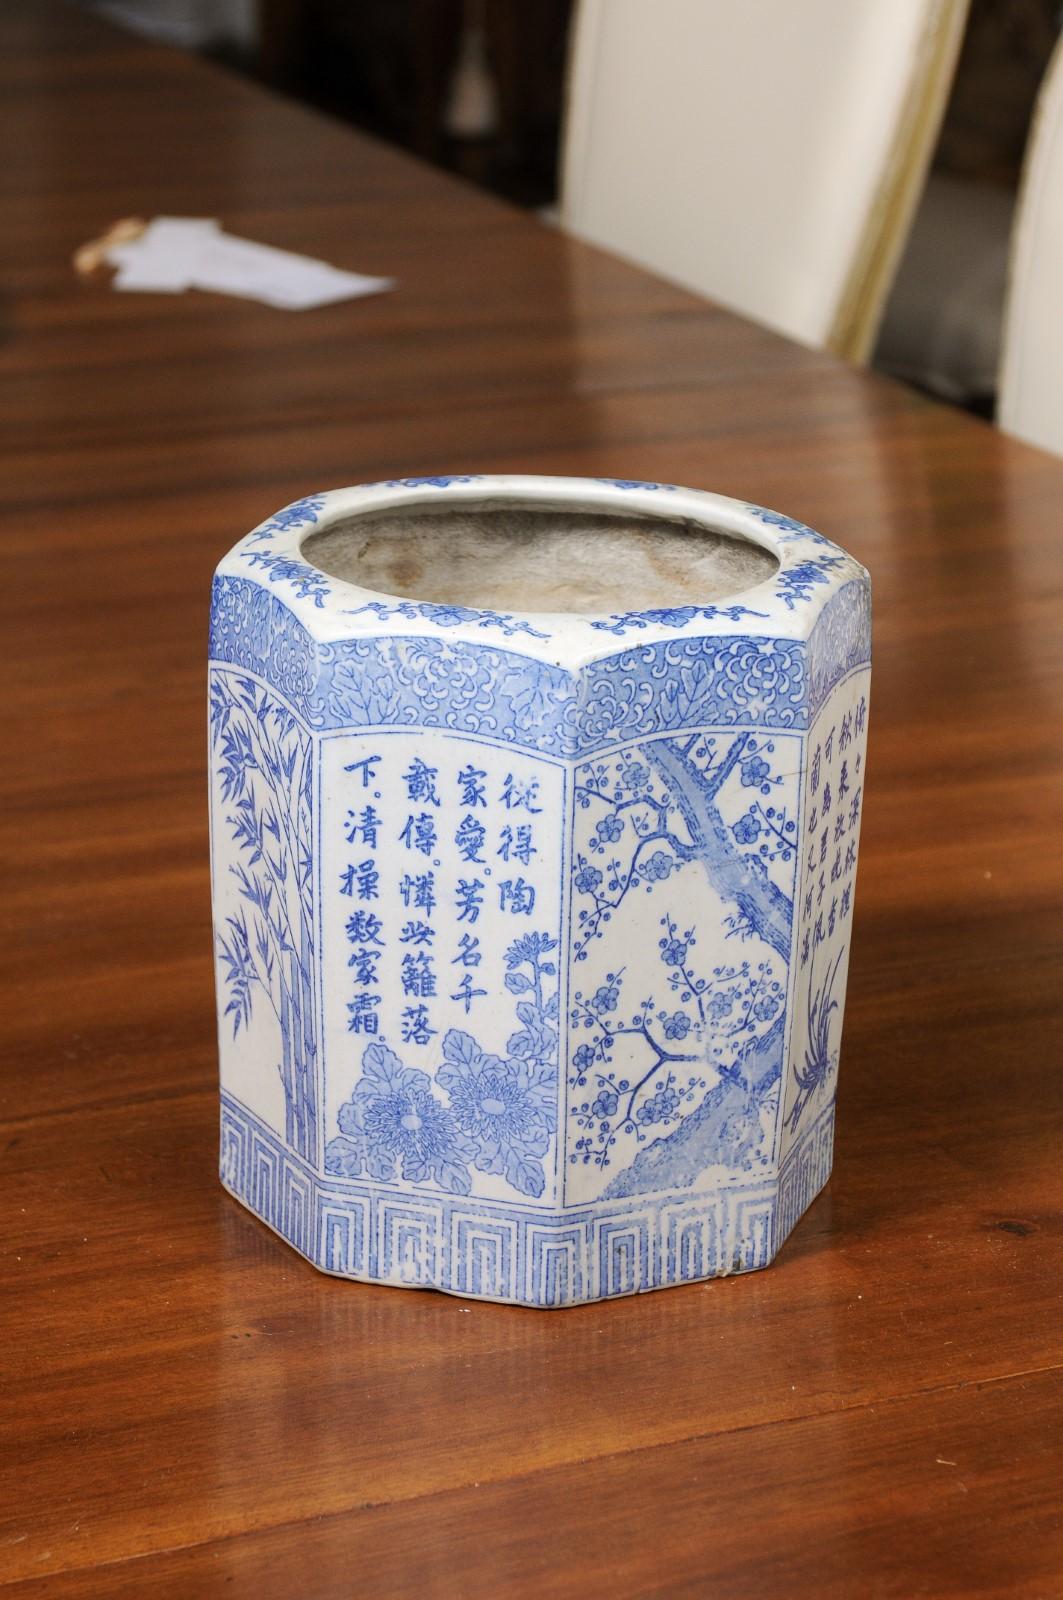 A Chinese blue and white hexagonal porcelain vase from the 20th century with hand-painted bamboo, flowers and calligraphy. Created in China during the 20th century, this porcelain vase features an hexagonal body adorned with a hand-painted blue